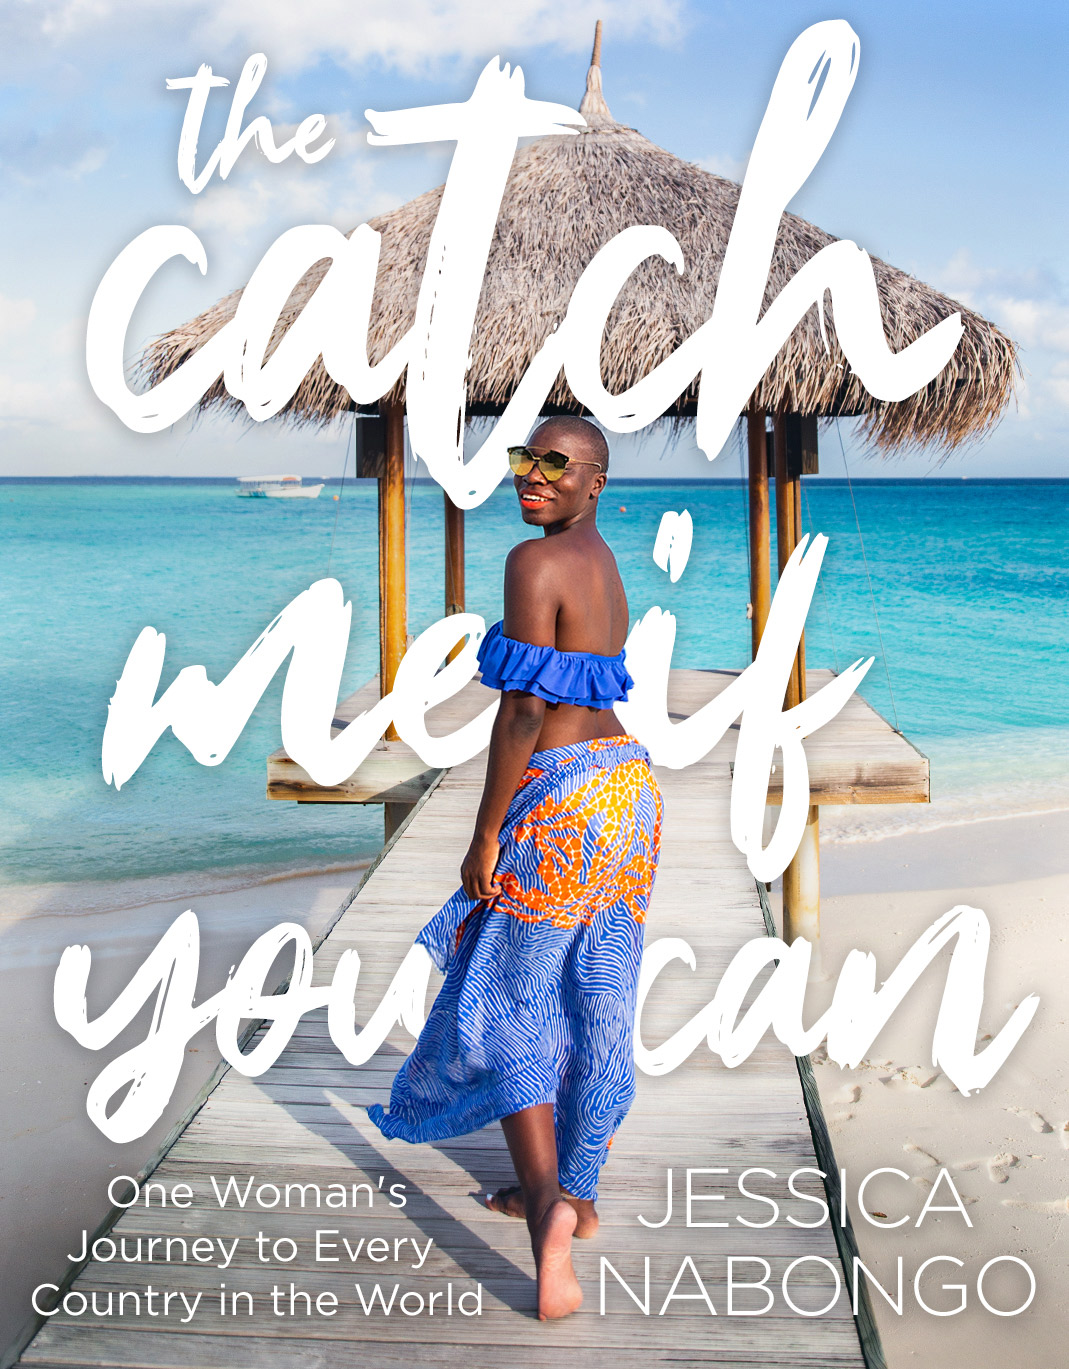 The Catch Me If You Can book, out on June 14th